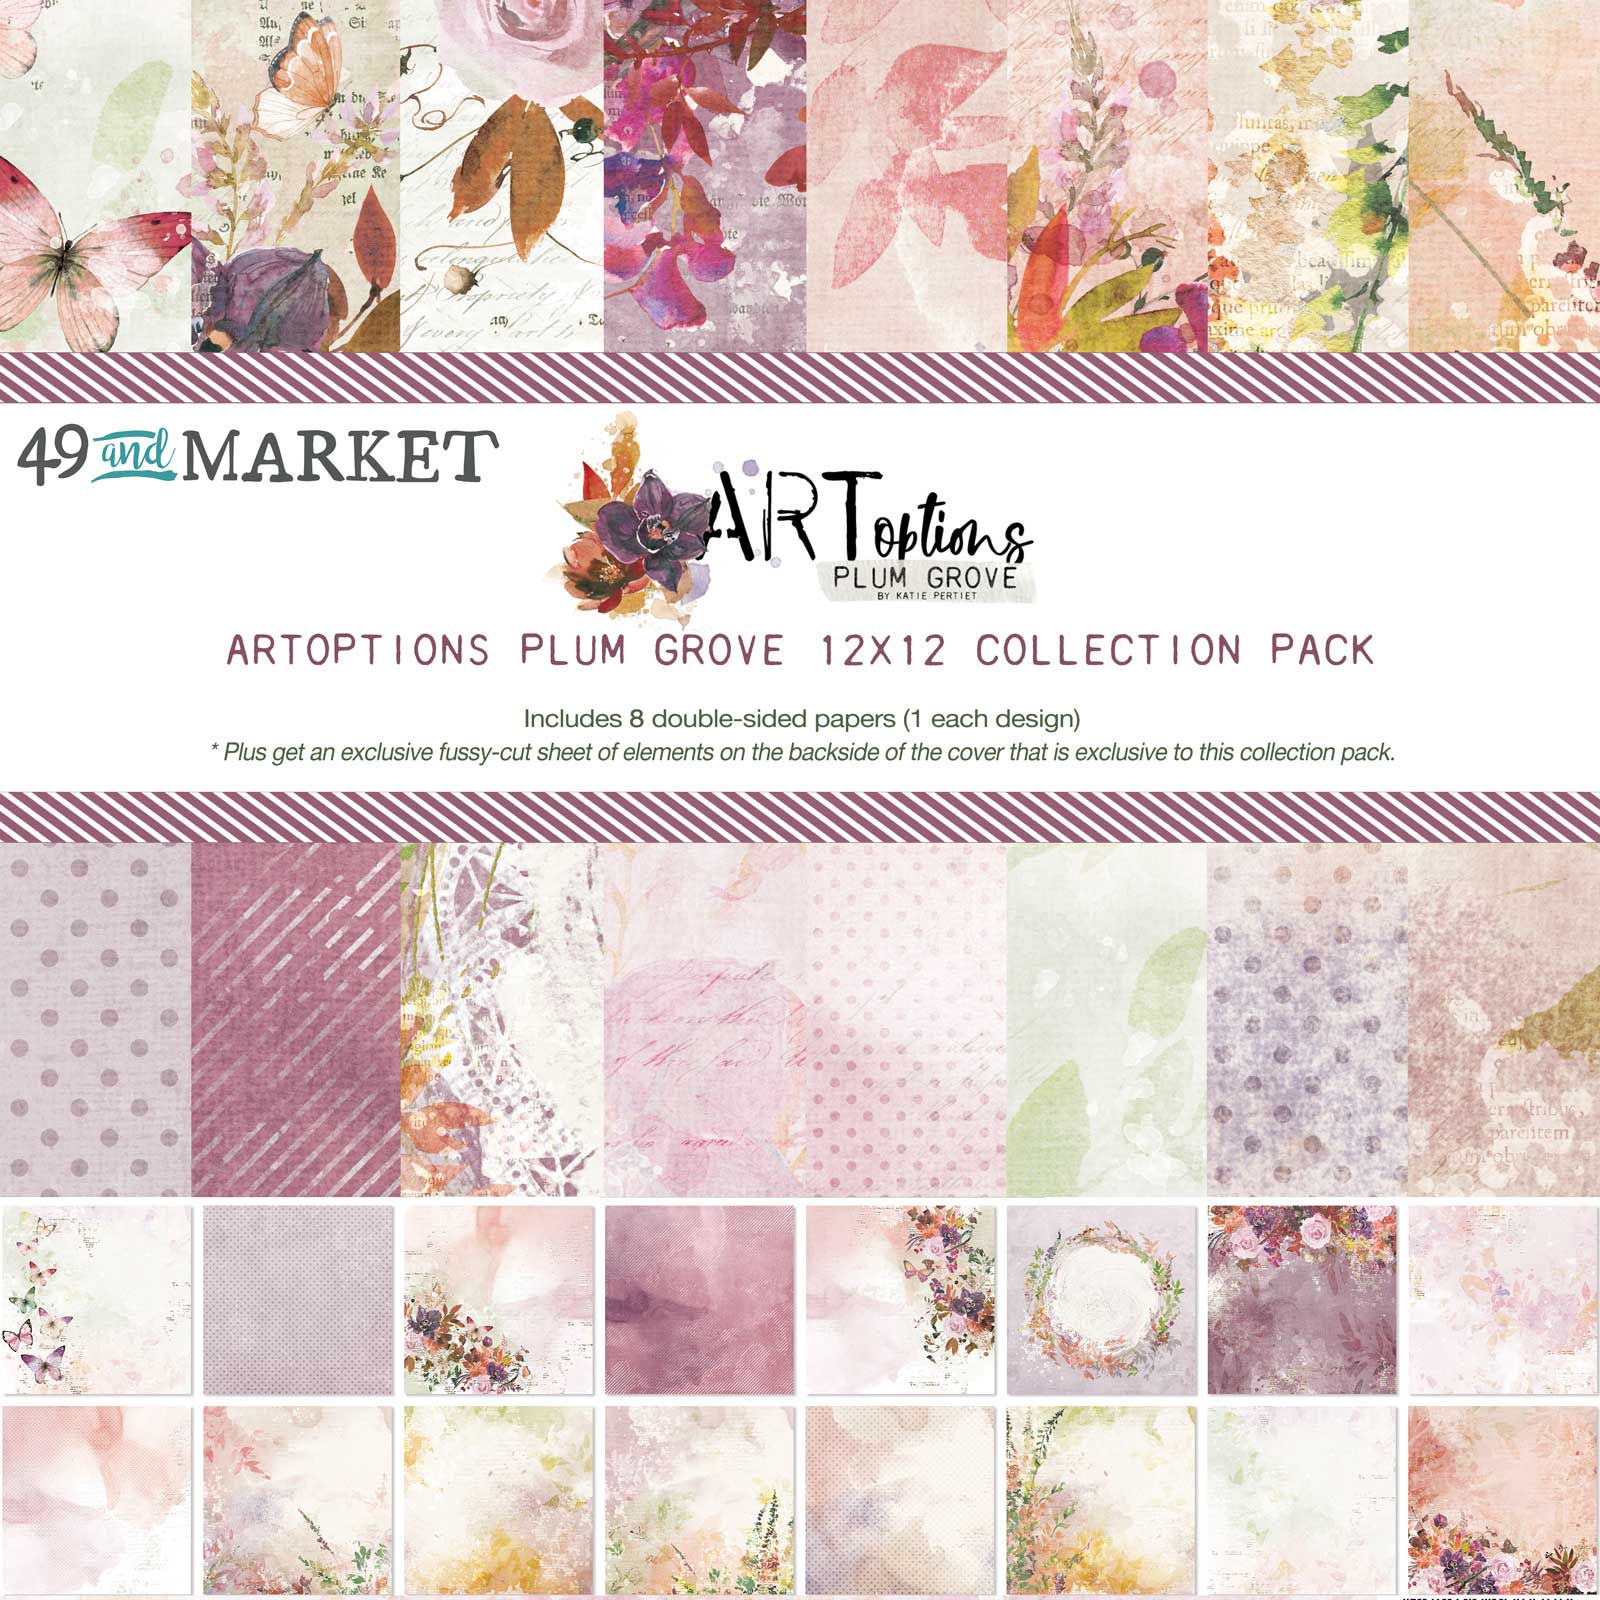 49 and Market-Art Options-Plum Grove 12x12 Collection Pack